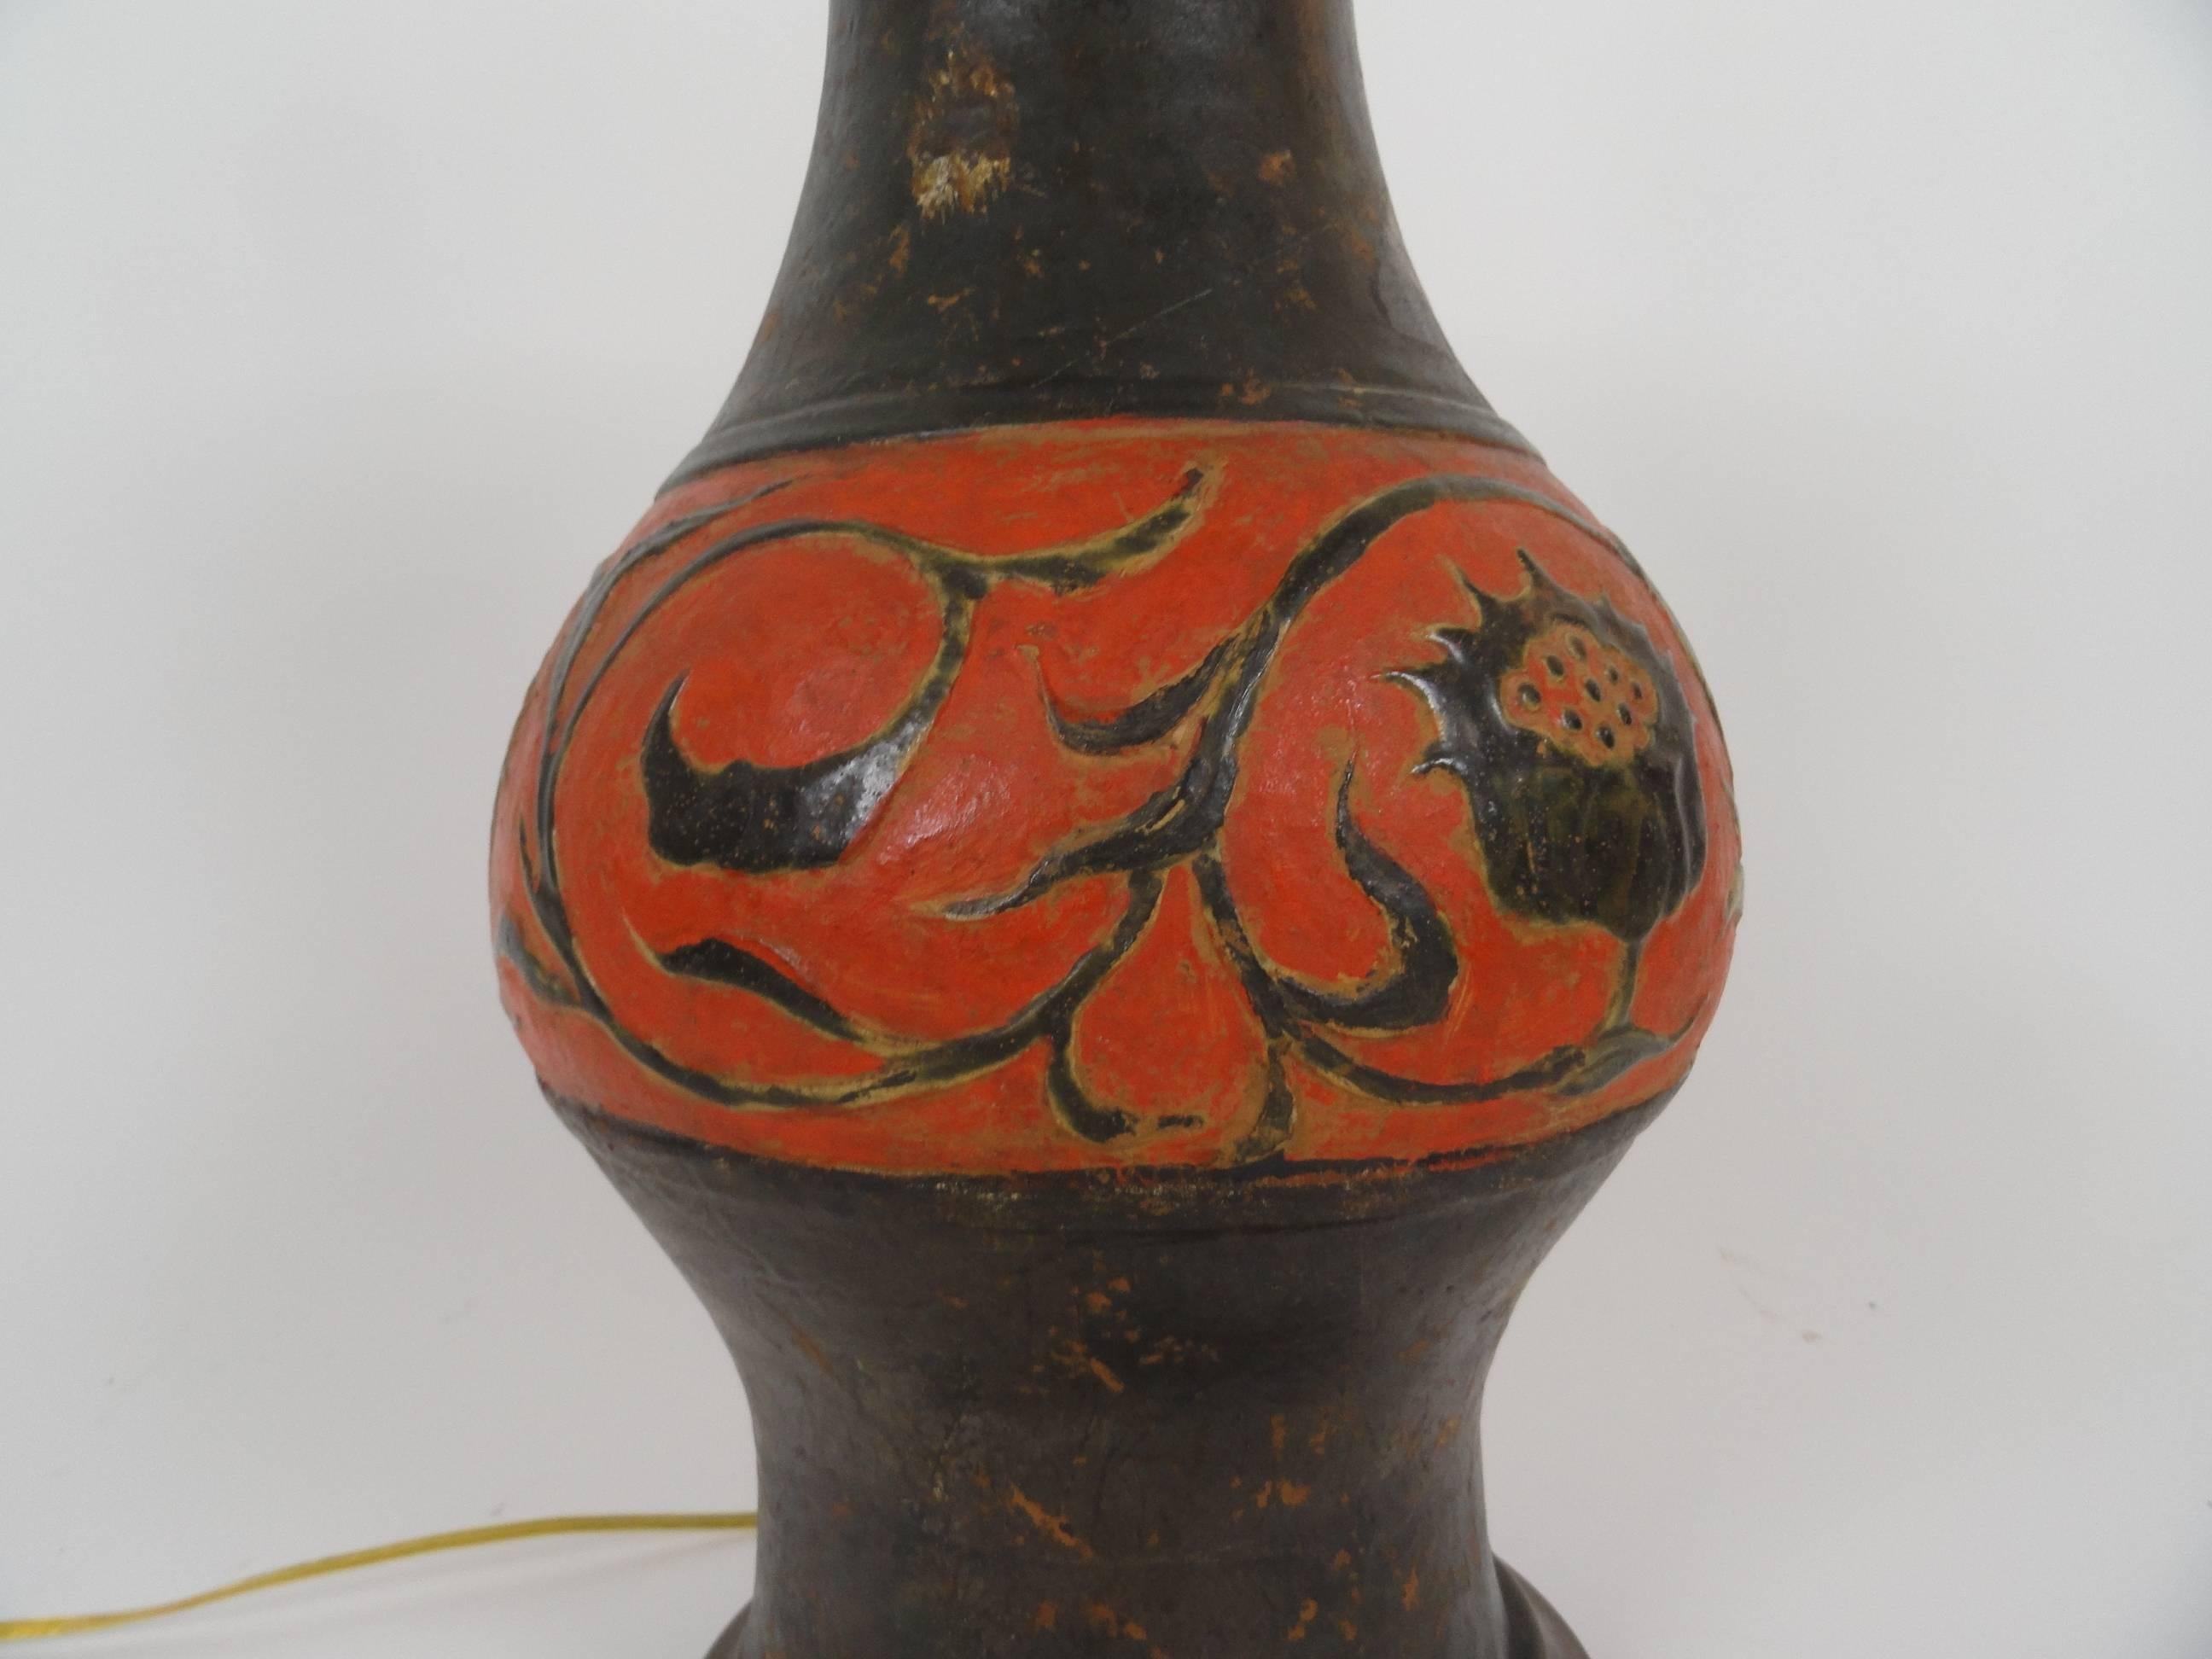 Etruscan style lamp. Ceramic vase lamp in the Etruscan taste with a naturally worn finish.
Measures: 20.5" high vase.